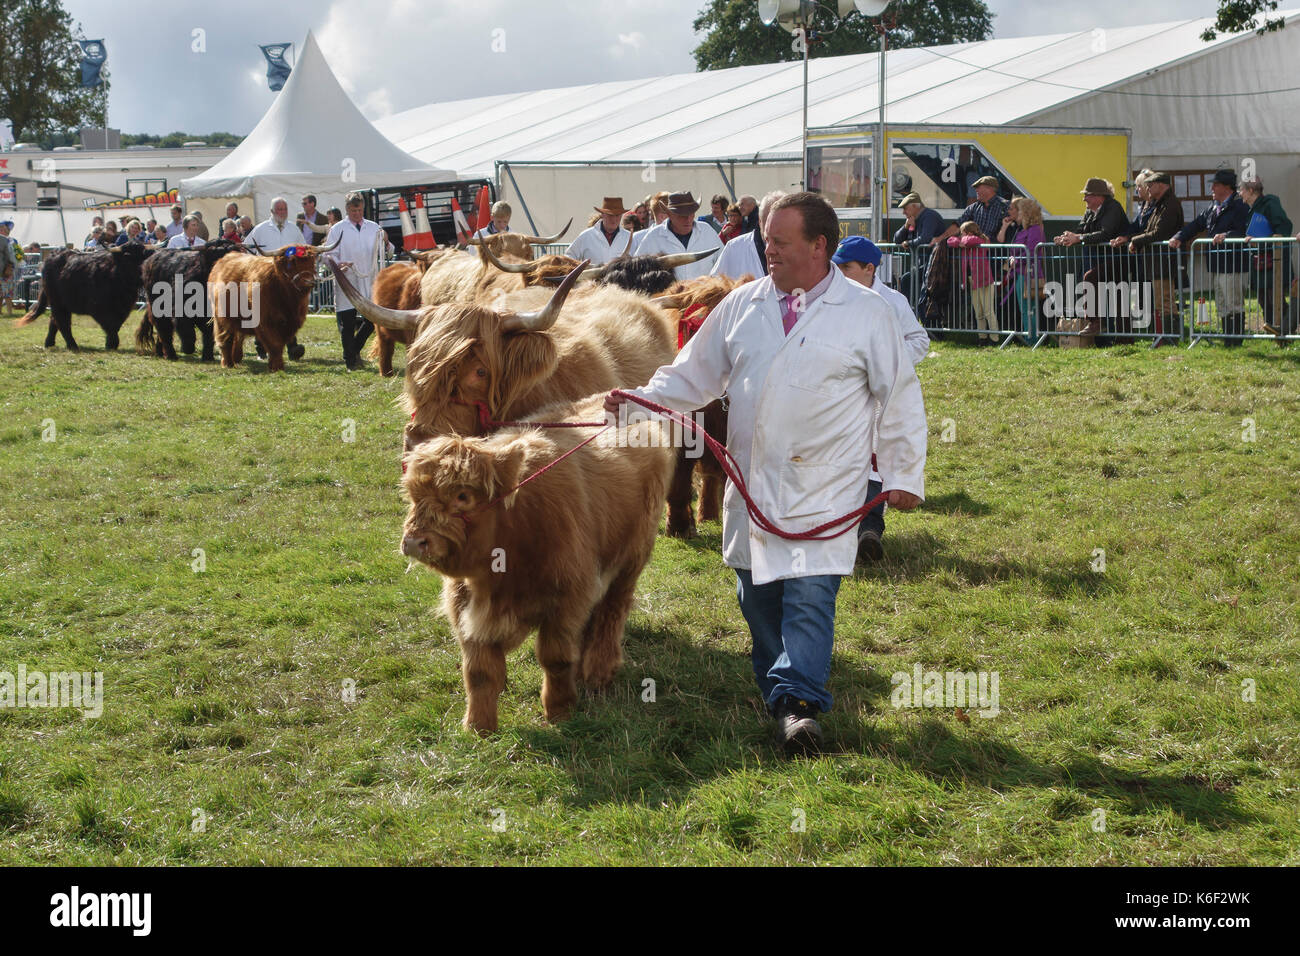 The Kington Show, Herefordshire, UK. A traditional livestock, produce and horticultural show. A Highland cow and calf in the Grand Parade Stock Photo